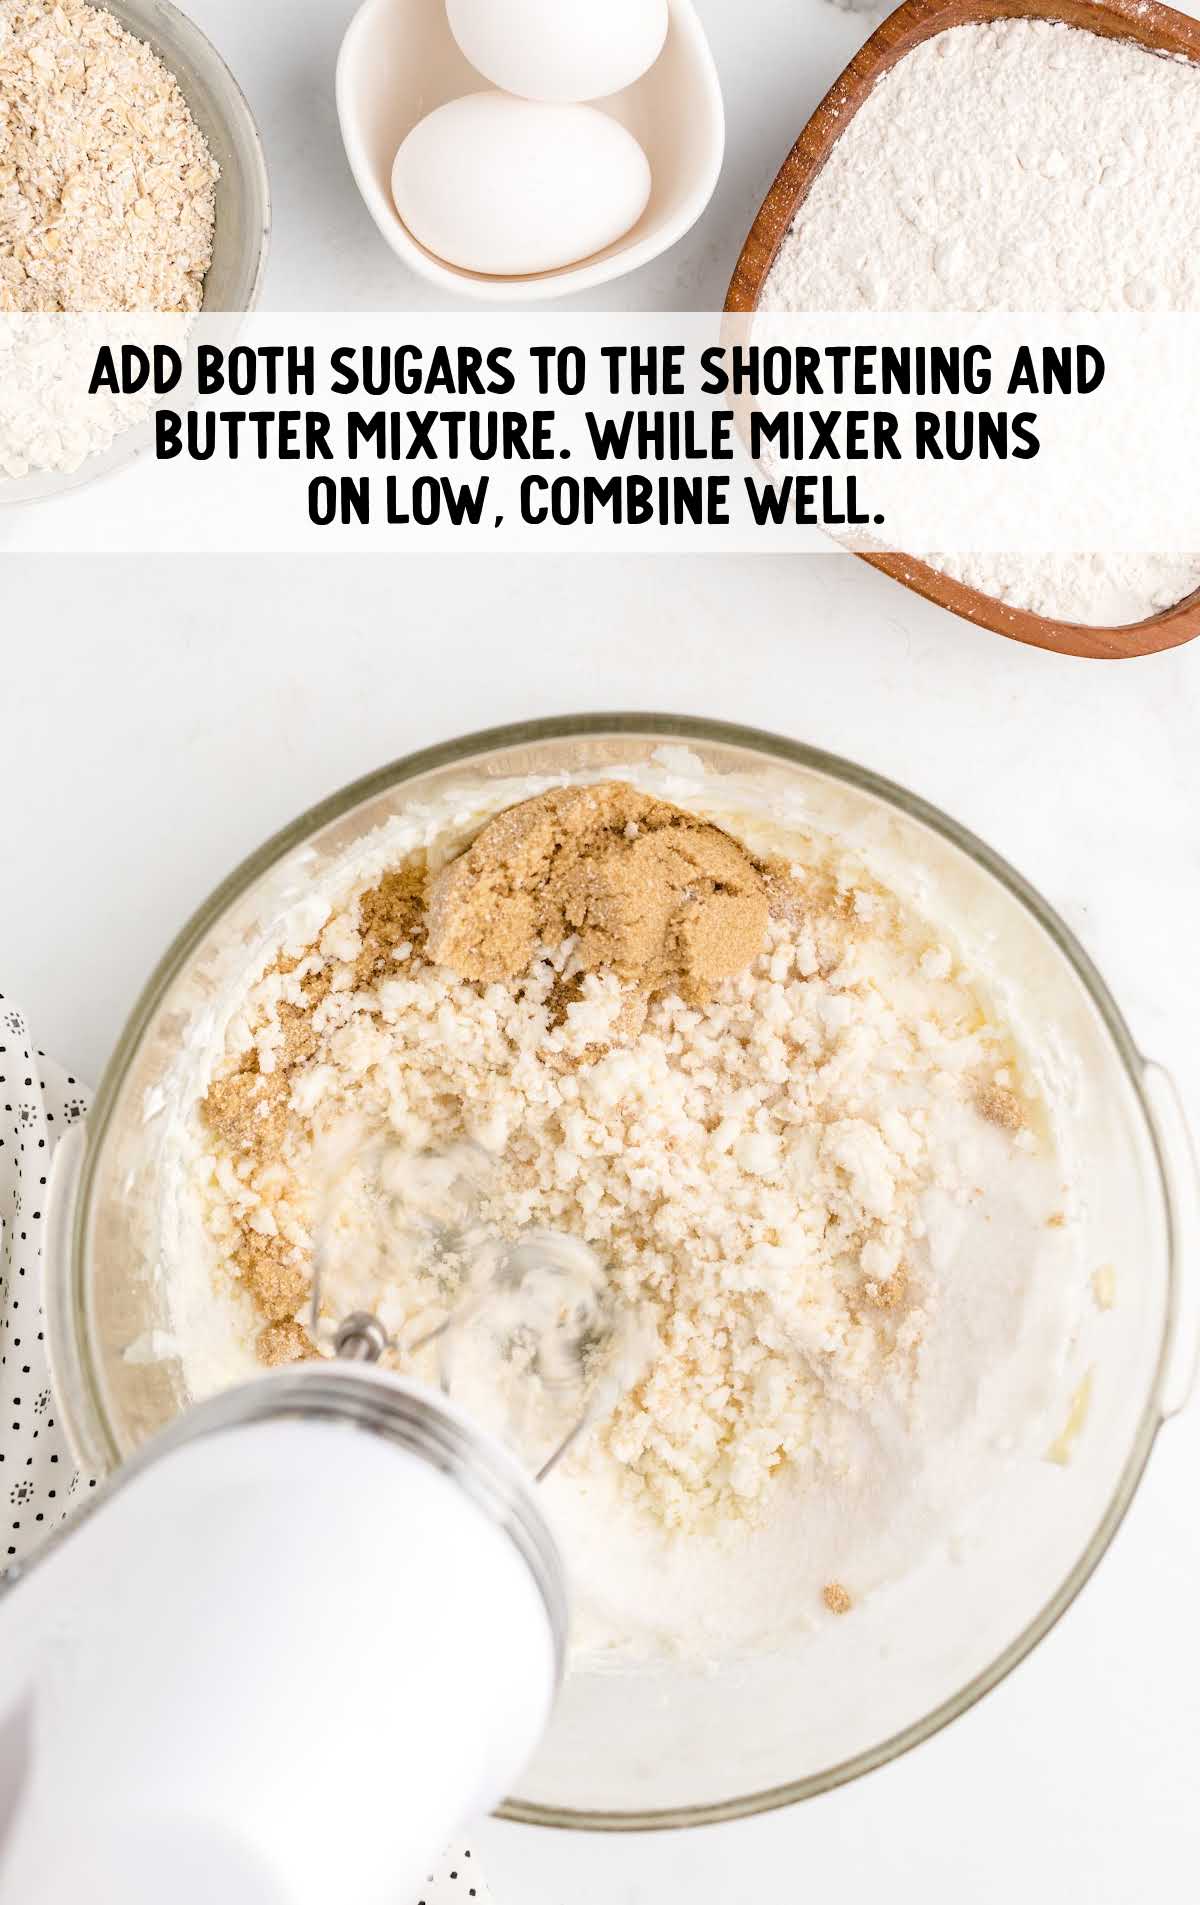 sugar and butter mixture added while mixer runs